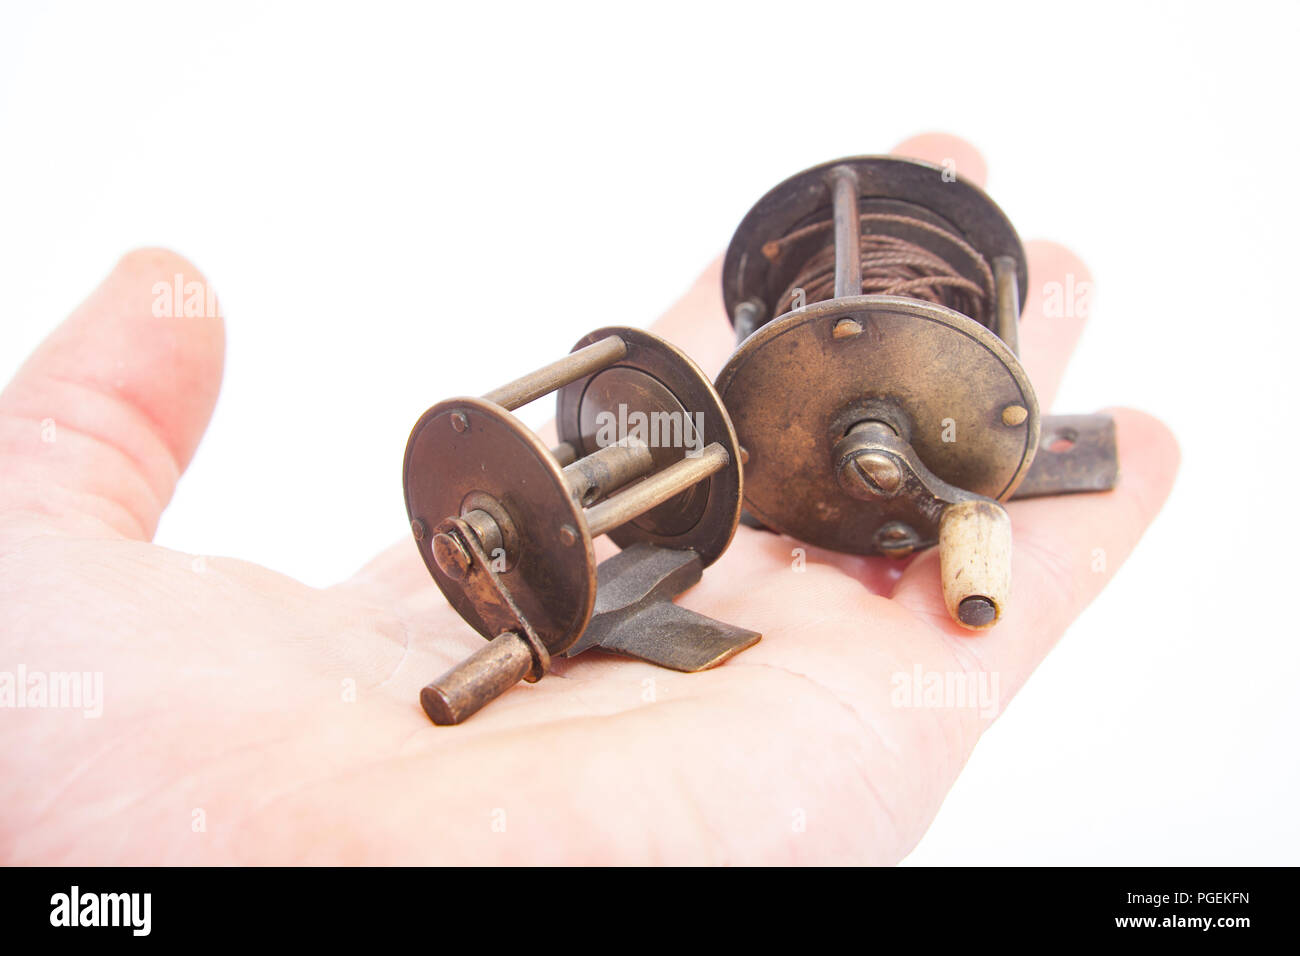 615 Antique Fishing Reel Images, Stock Photos, 3D objects